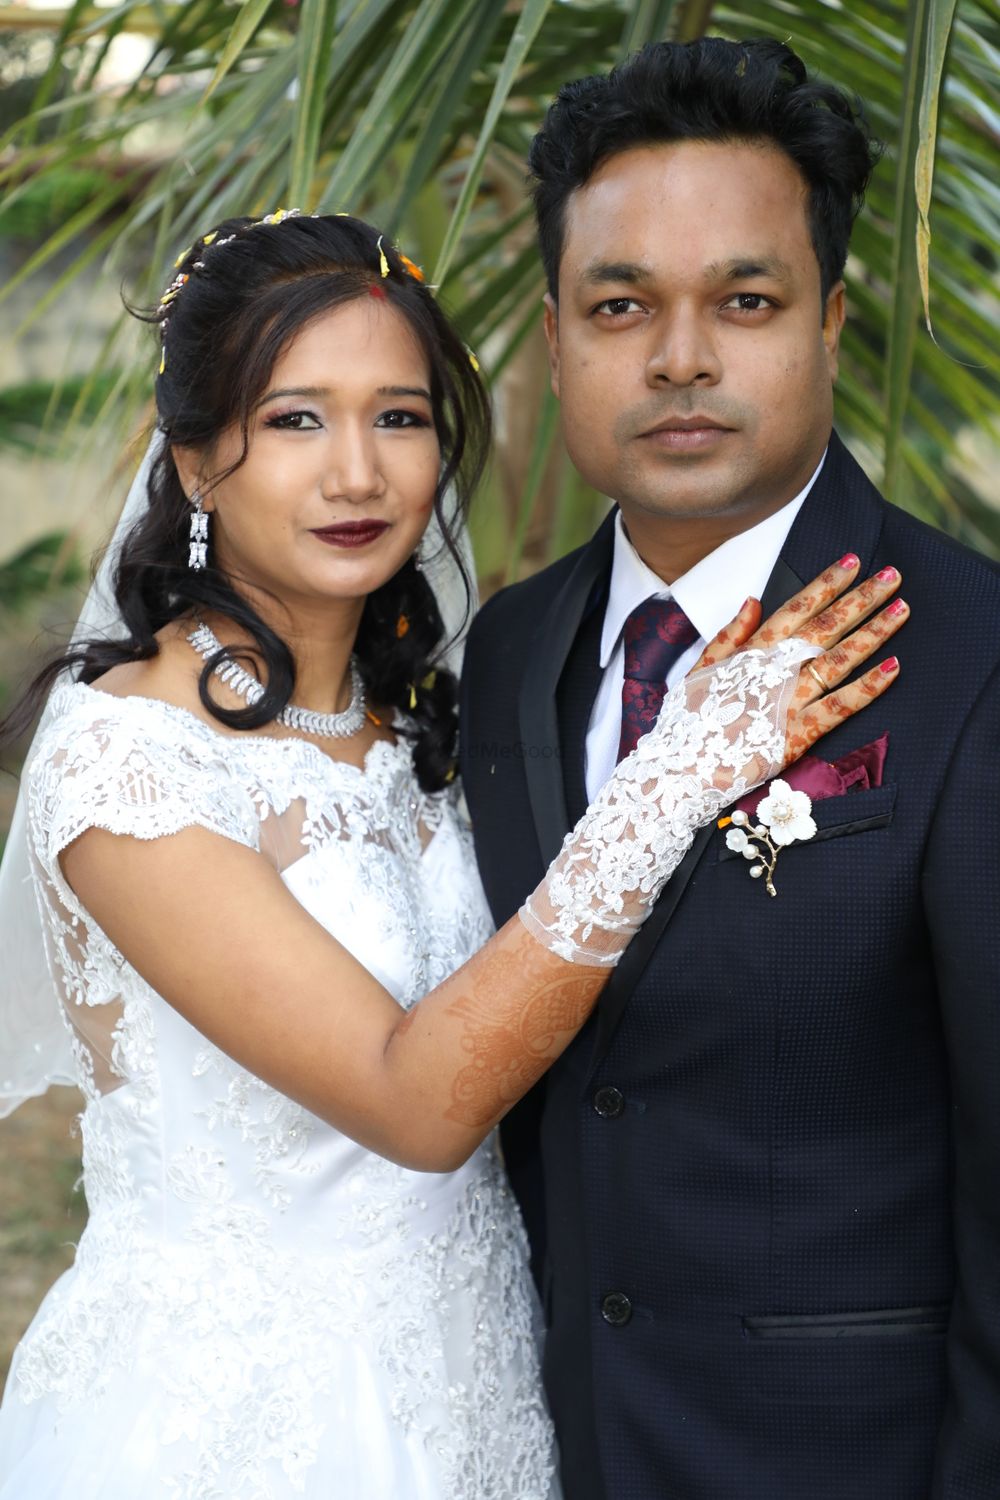 Photo From Punit and Shilpa - By The Photo Box